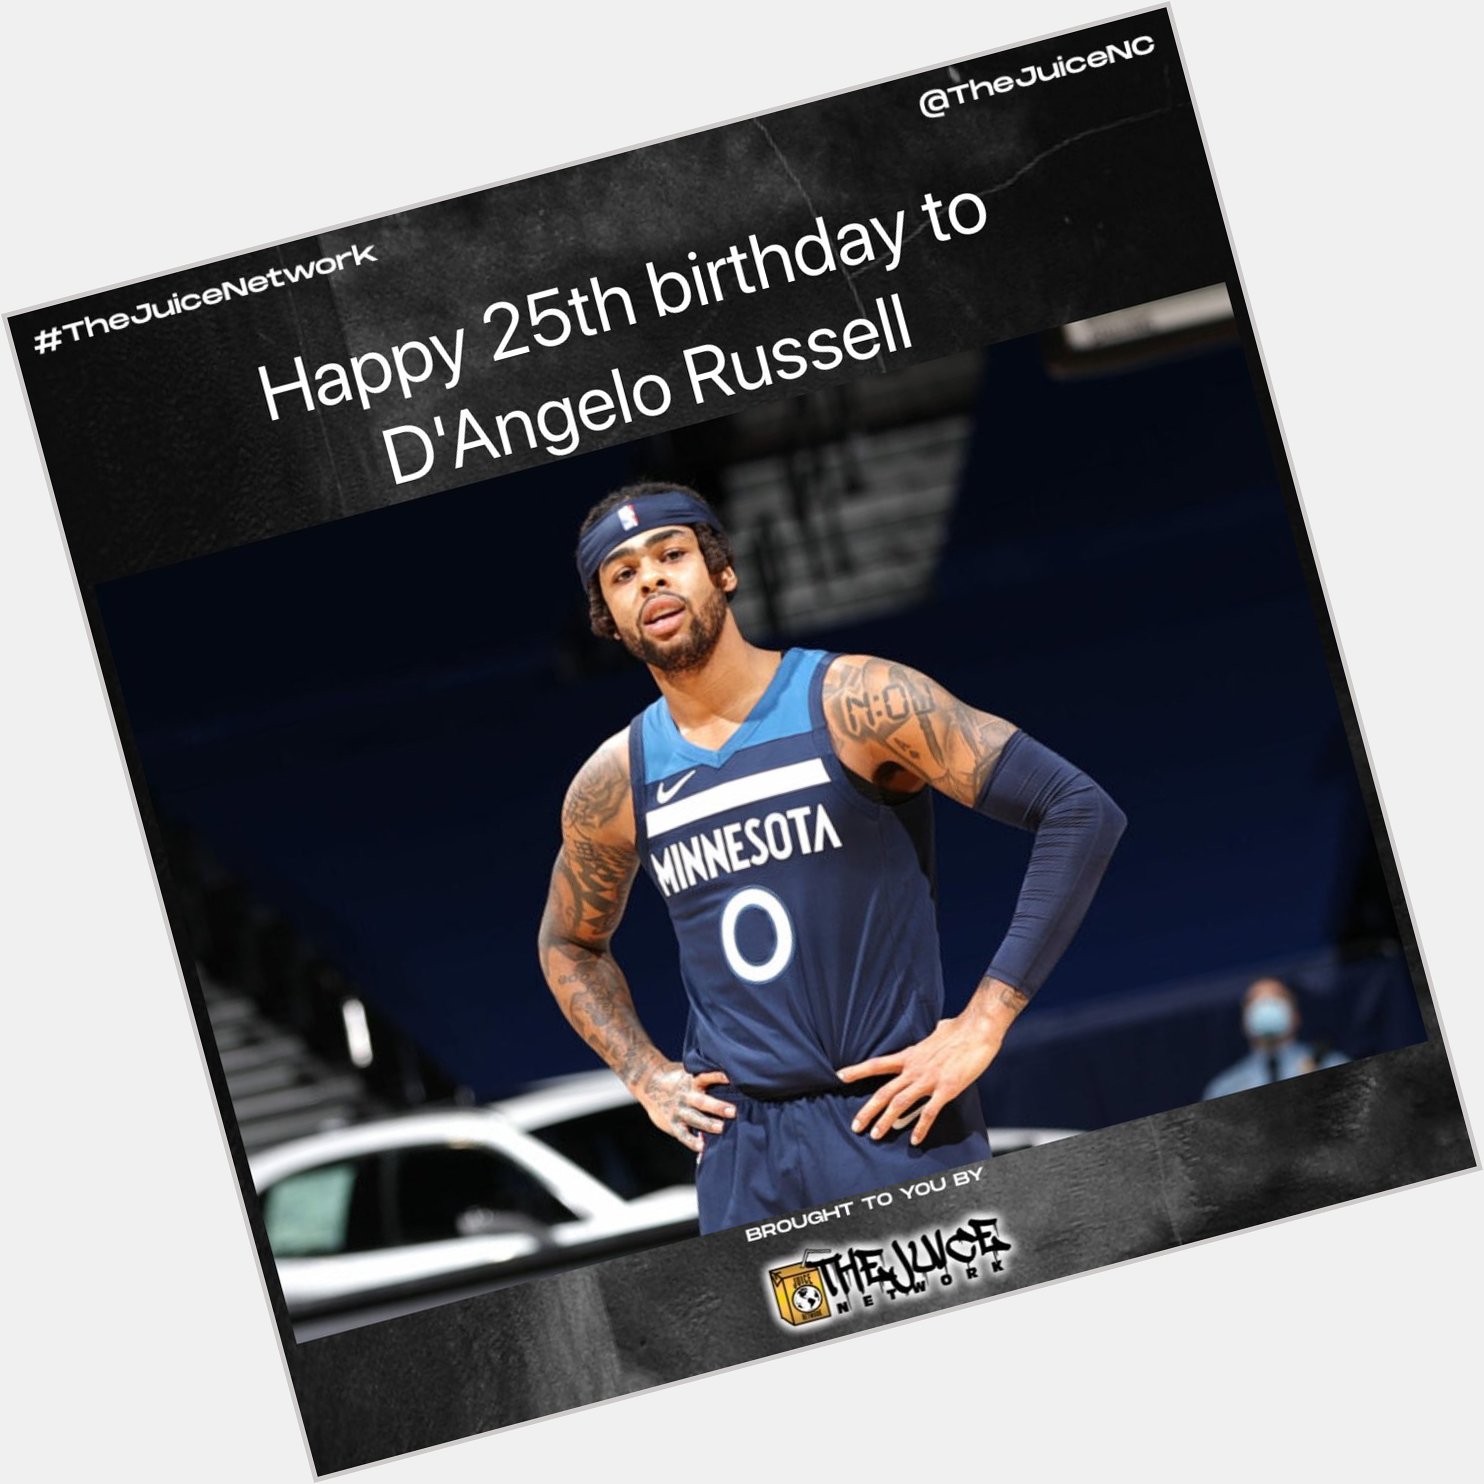 Happy 25th birthday to D Angelo Russell!  